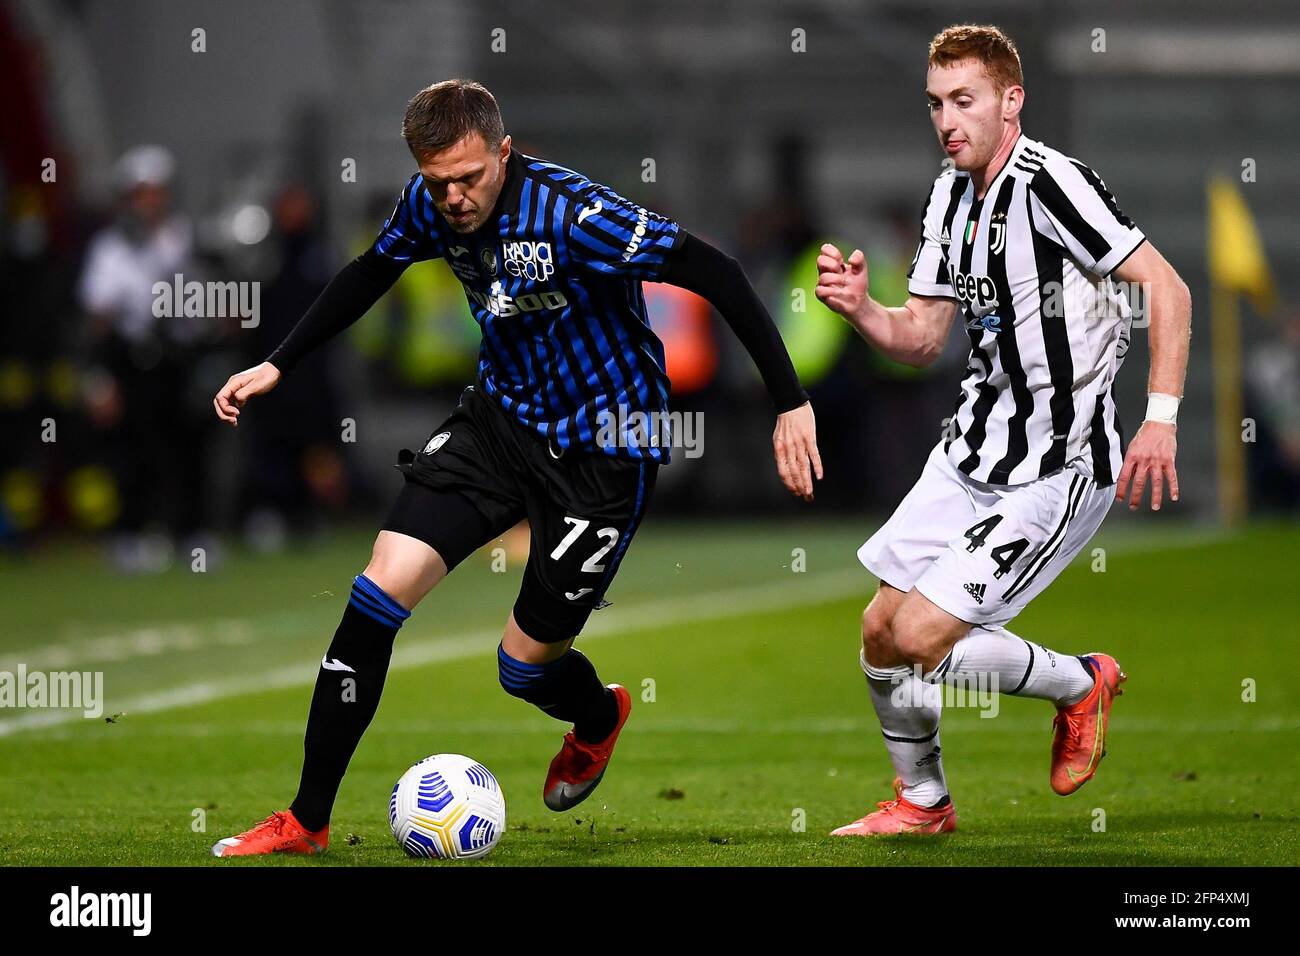 Reggio Emilia, Italy. 19 May 2021. Josip Ilicic (L) of Atalanta BC is challenged by Dejan Kulusevski of Juventus FC during the TIMVISION Cup final football match between Atalanta BC and Juventus FC. Credit: Nicolò Campo/Alamy Live News Stock Photo